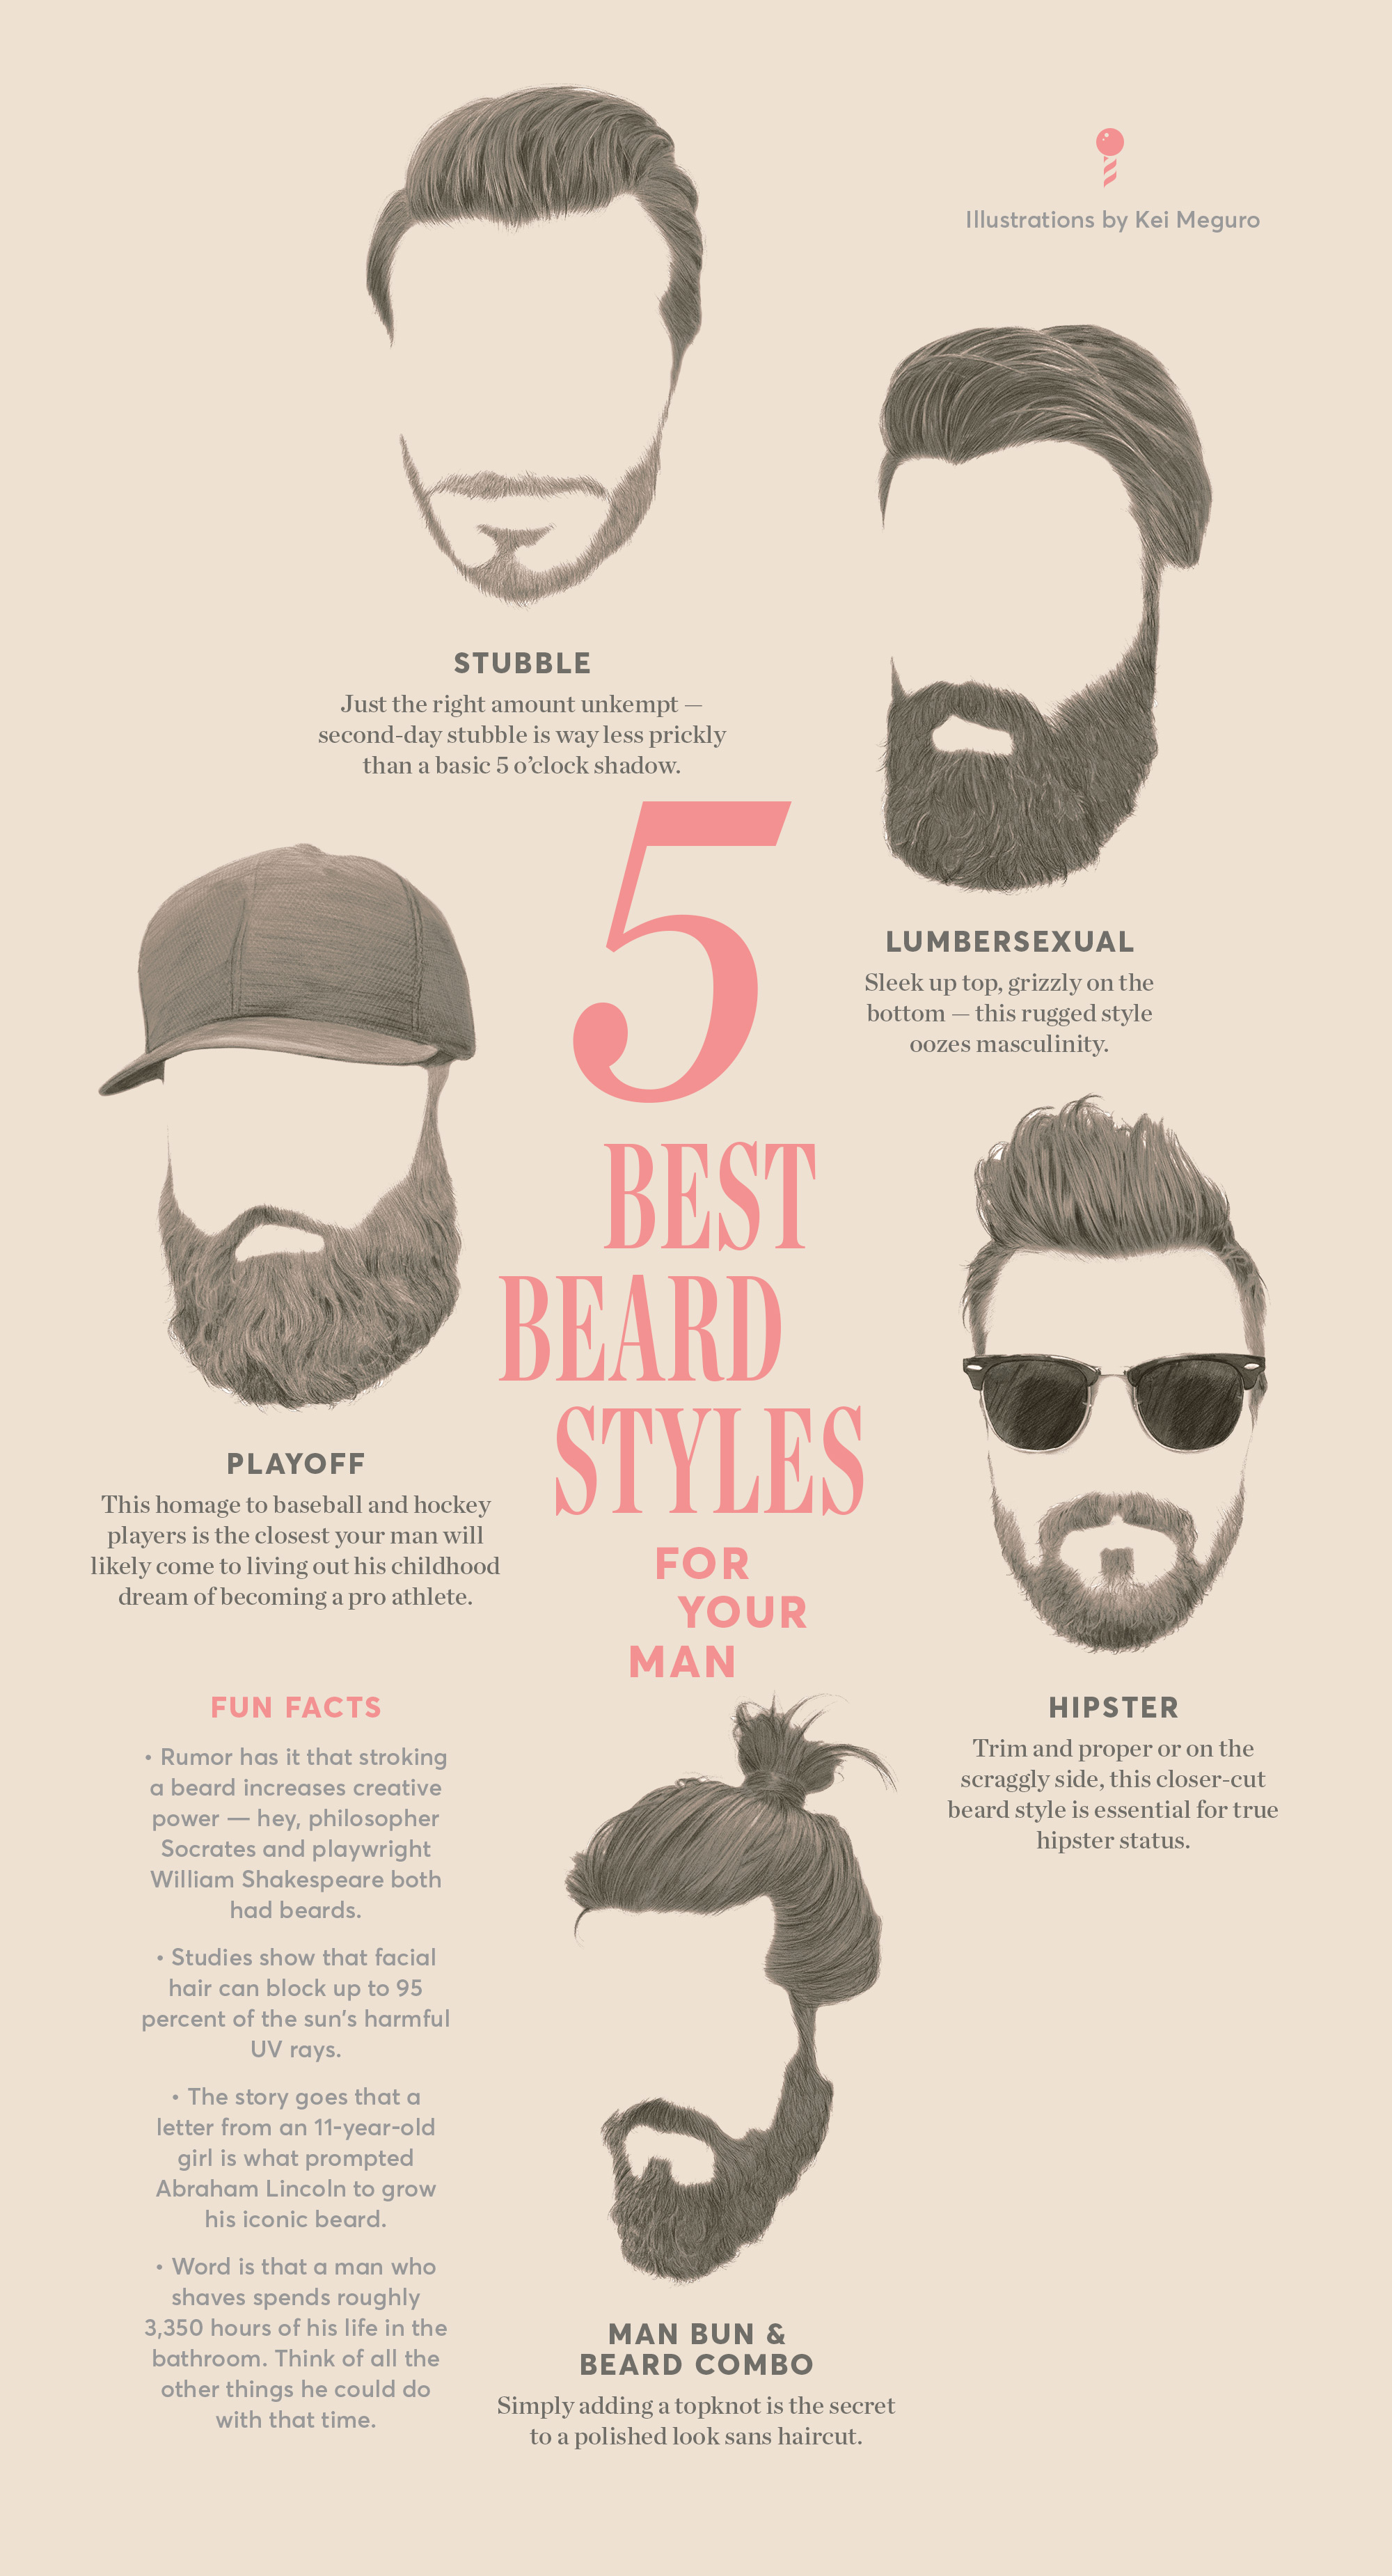 5 hot beard styles for your man